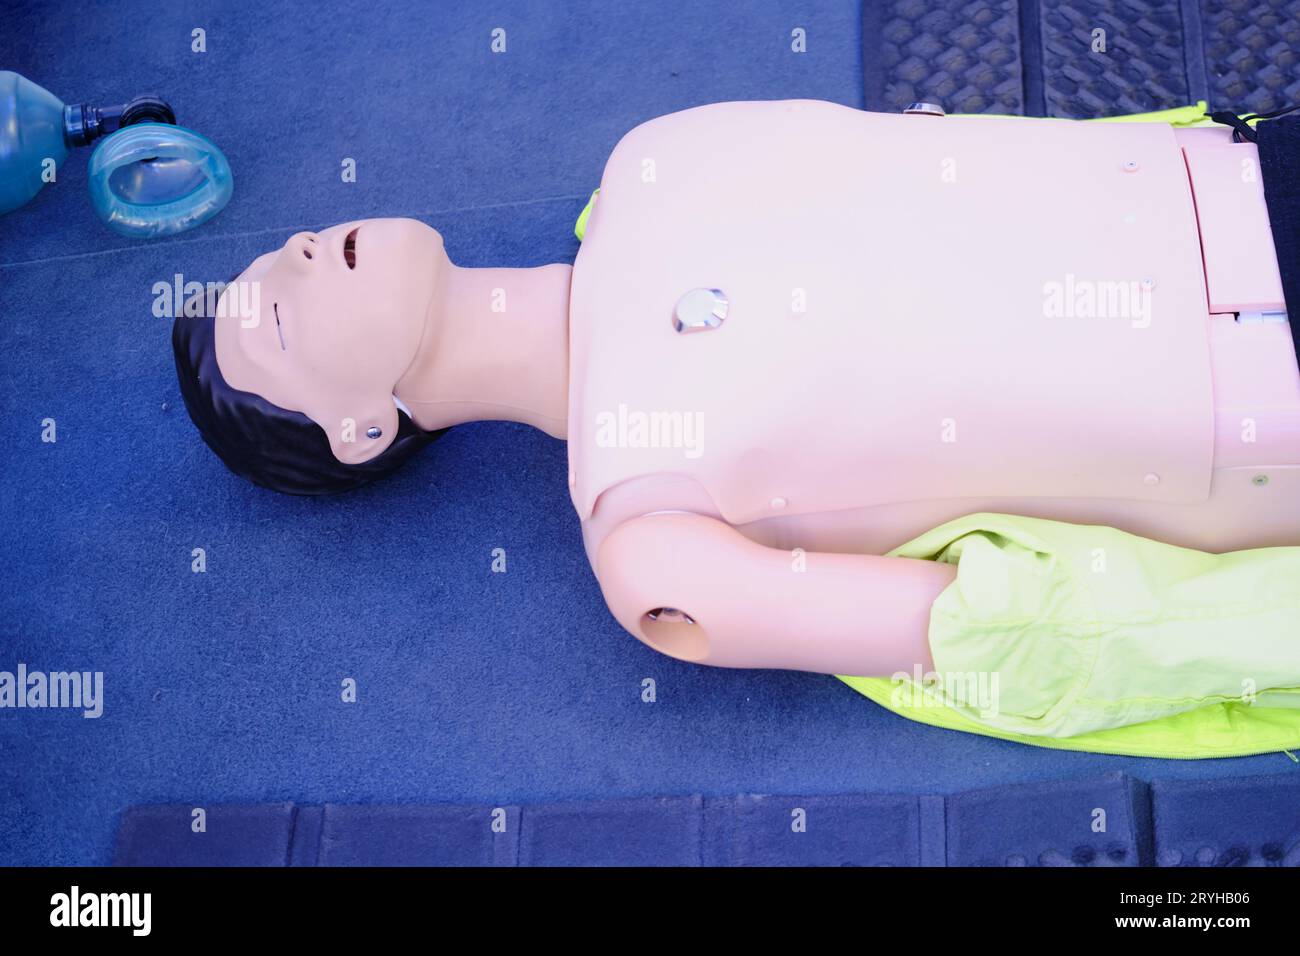 Ambulance training dummy on the floor of a hospital emergency room, training chest compressions in a mannequin Stock Photo